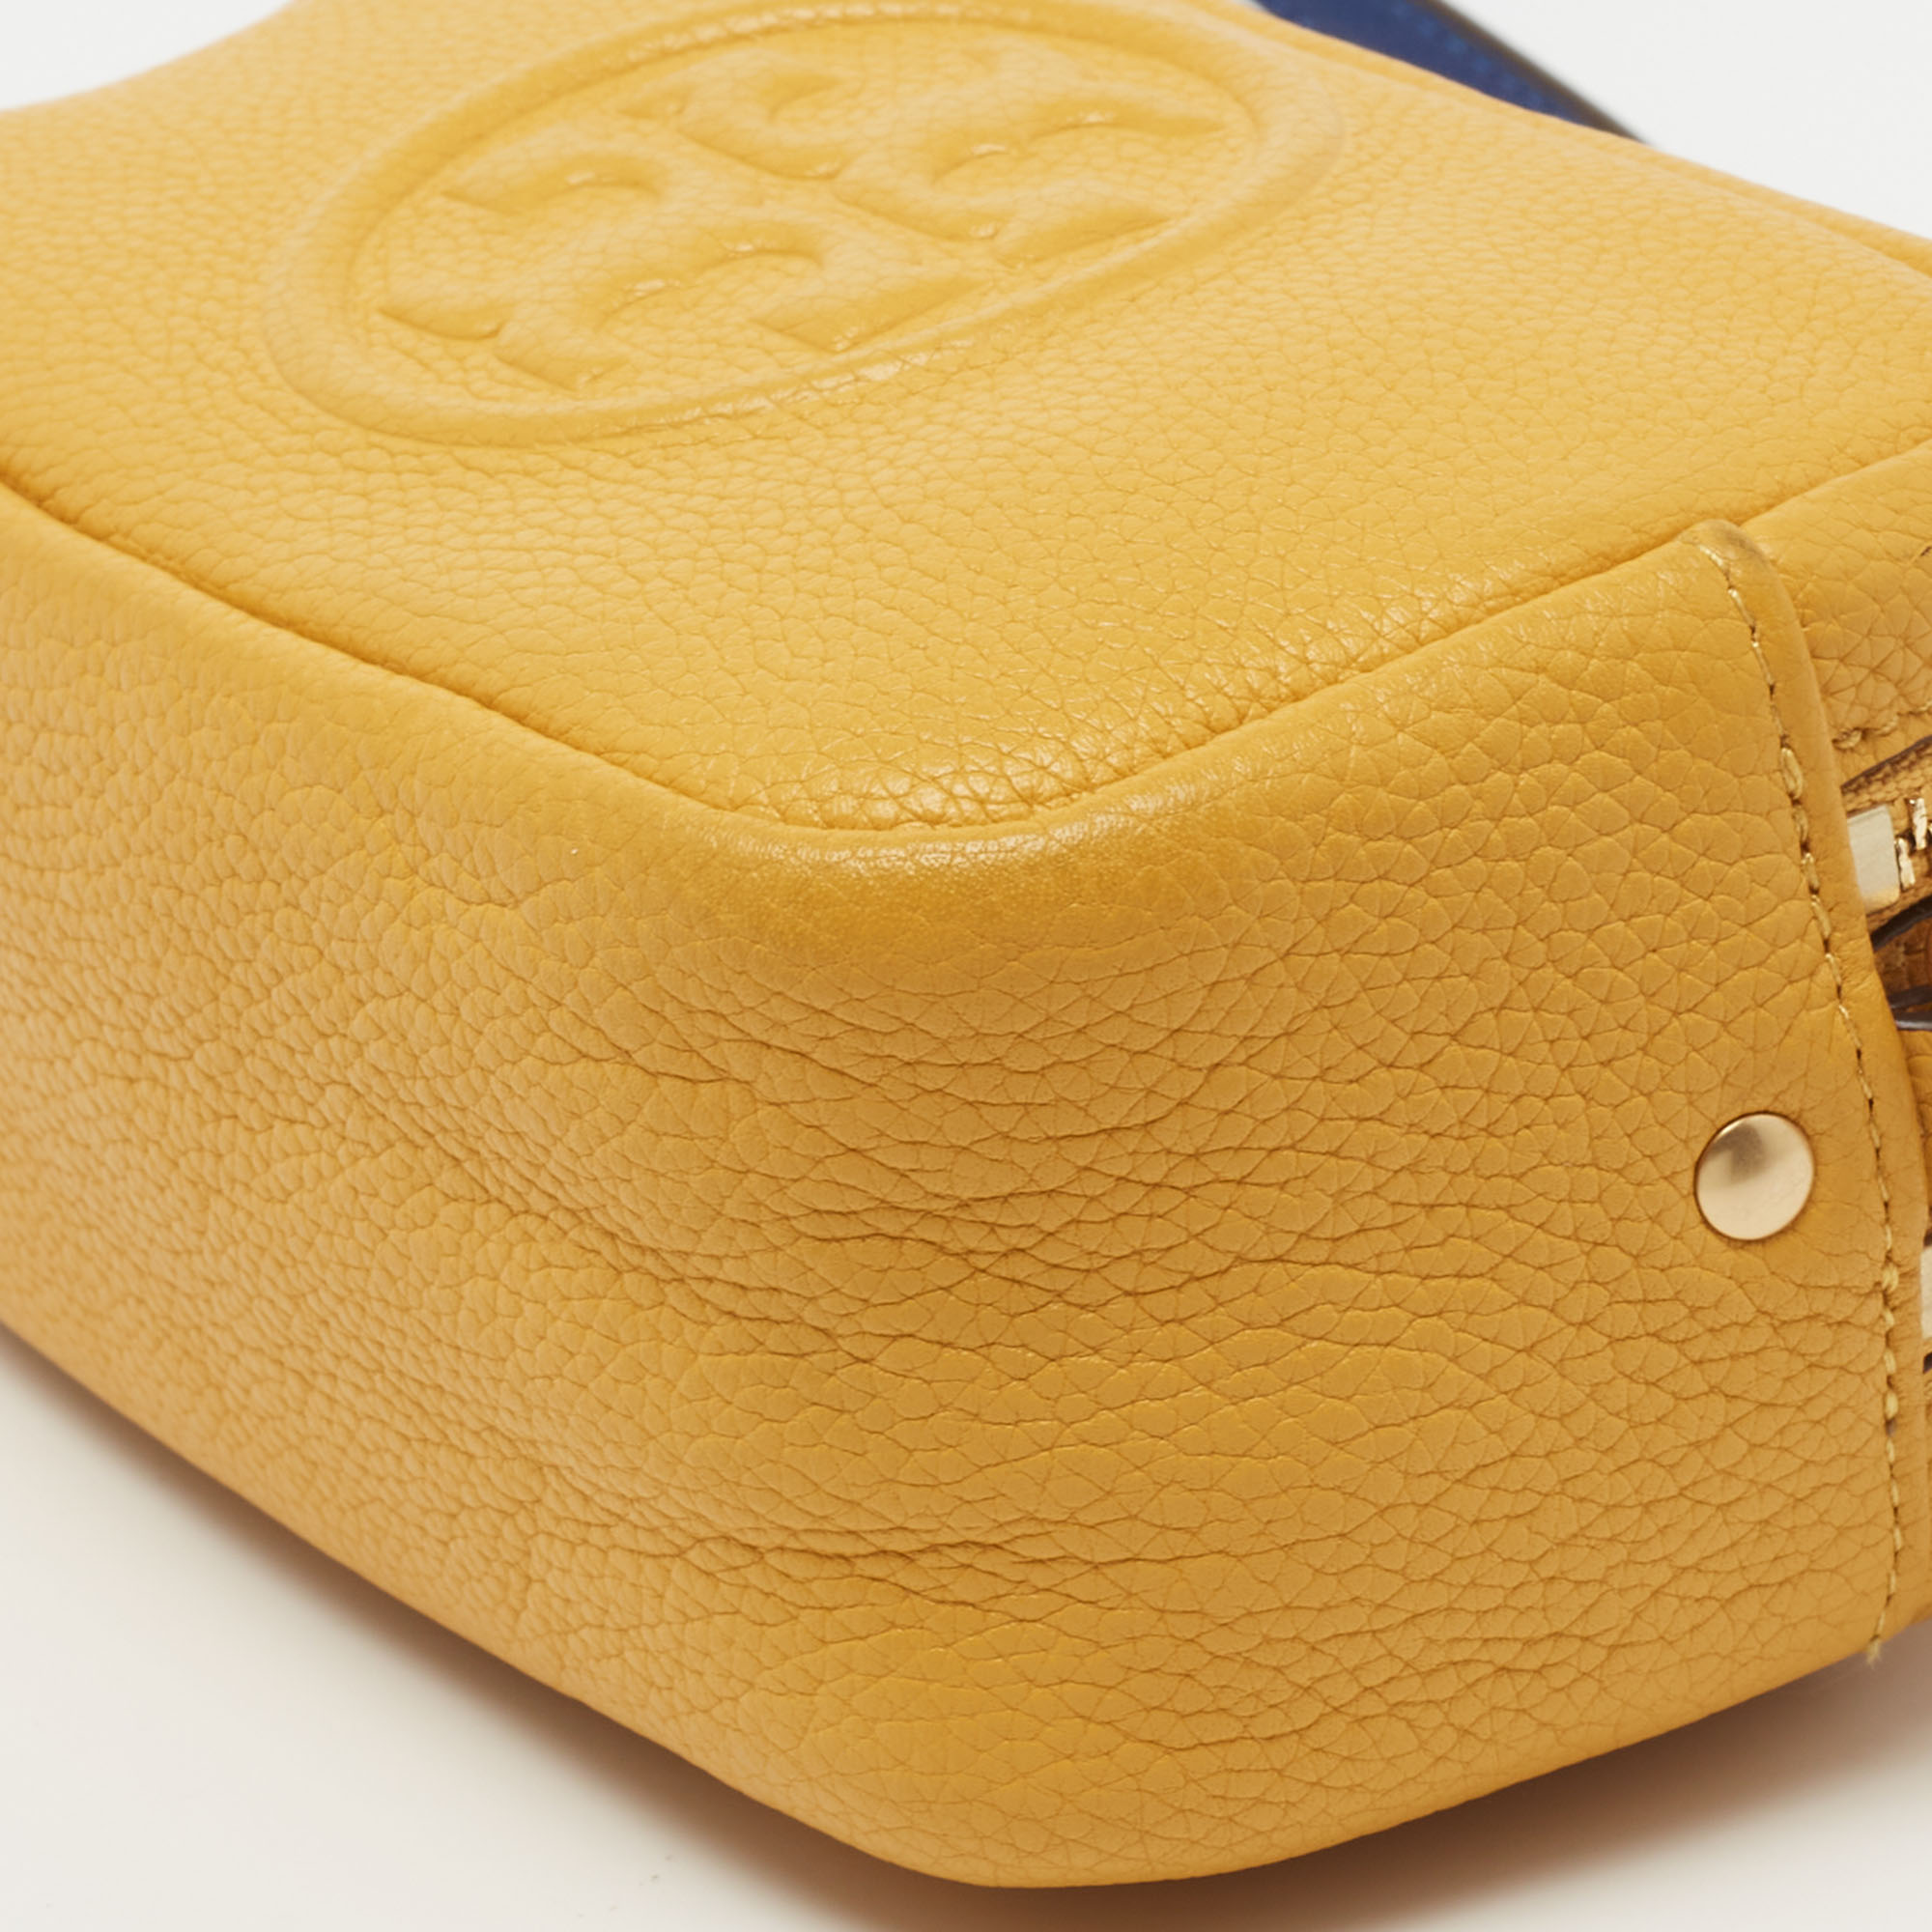 Leather crossbody bag Tory Burch Yellow in Leather - 33390738